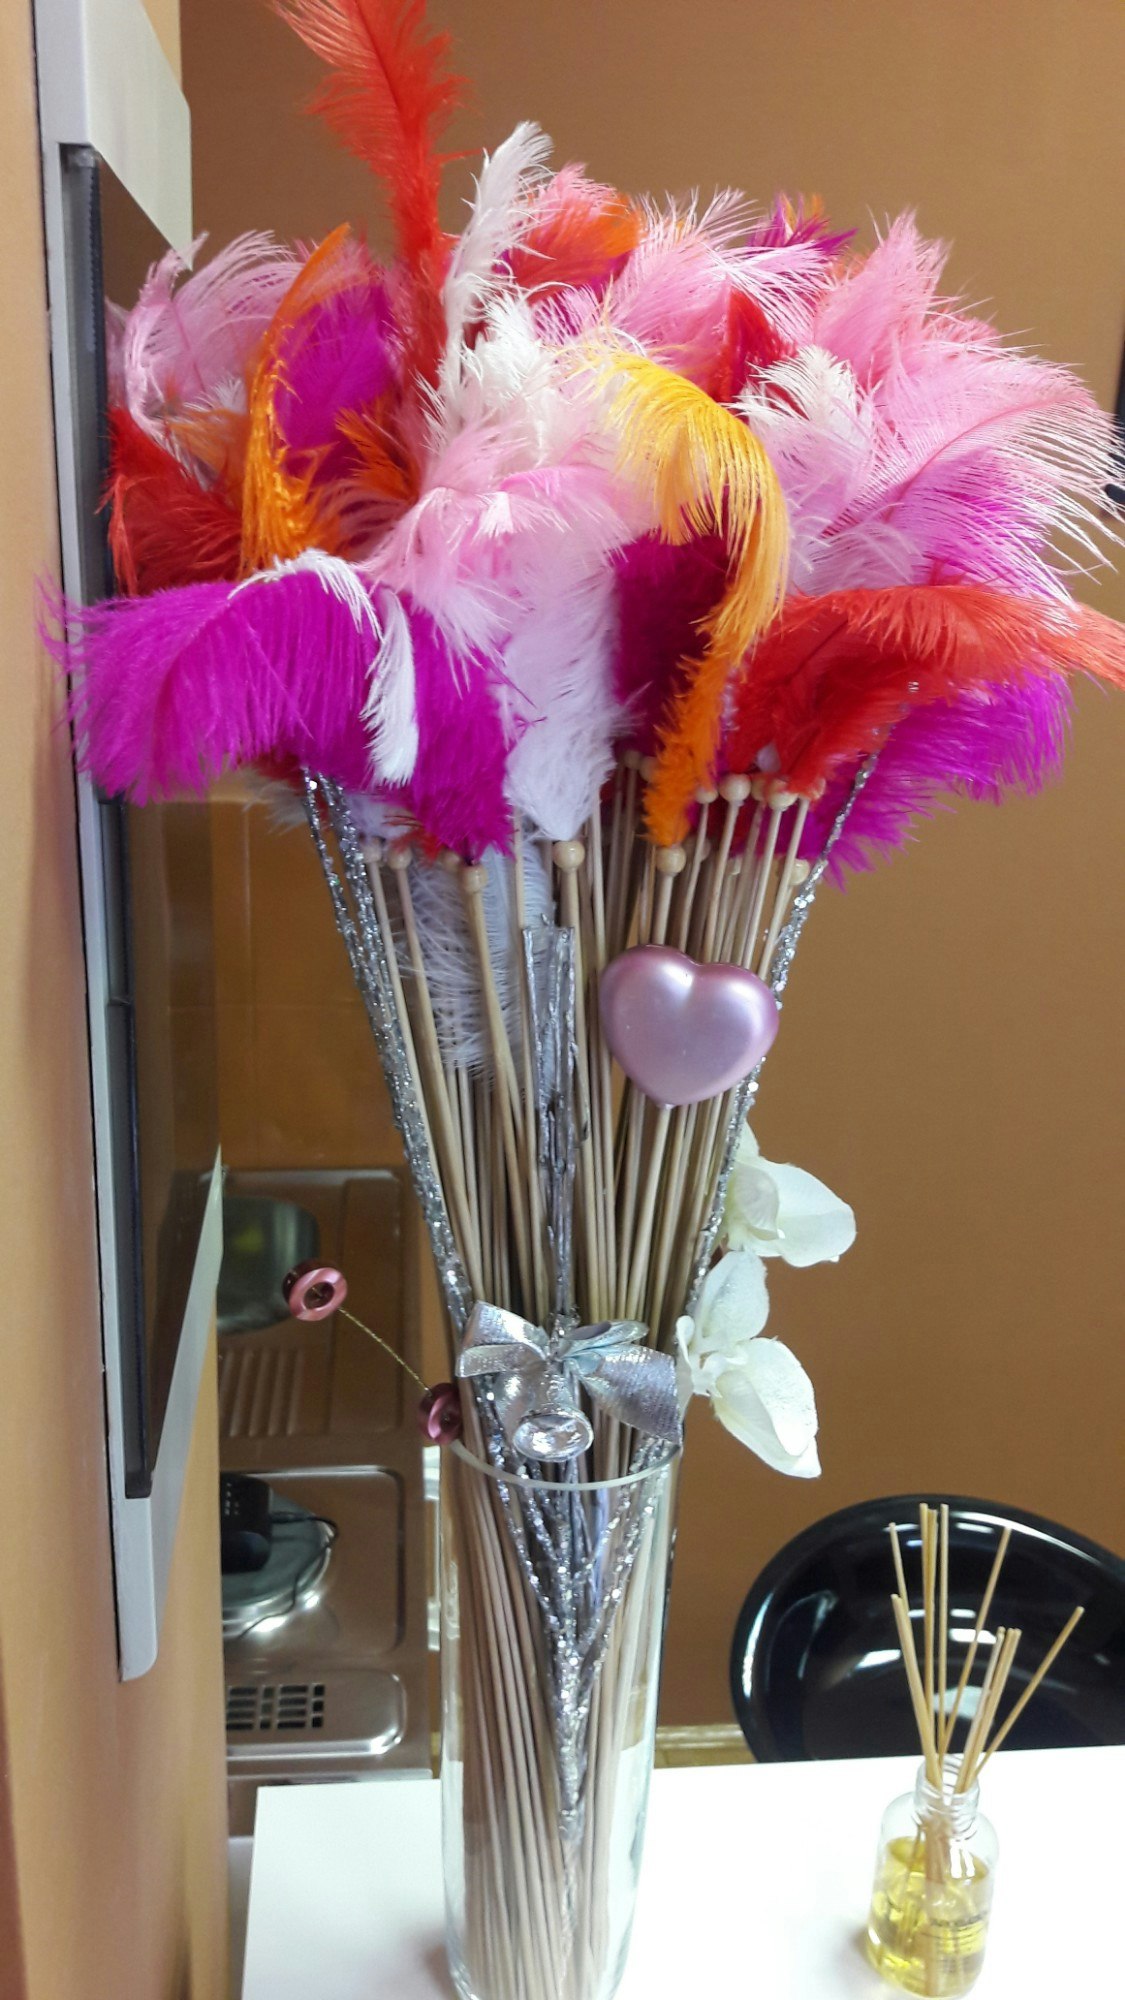 A bunch of colourful feathers in a vase.